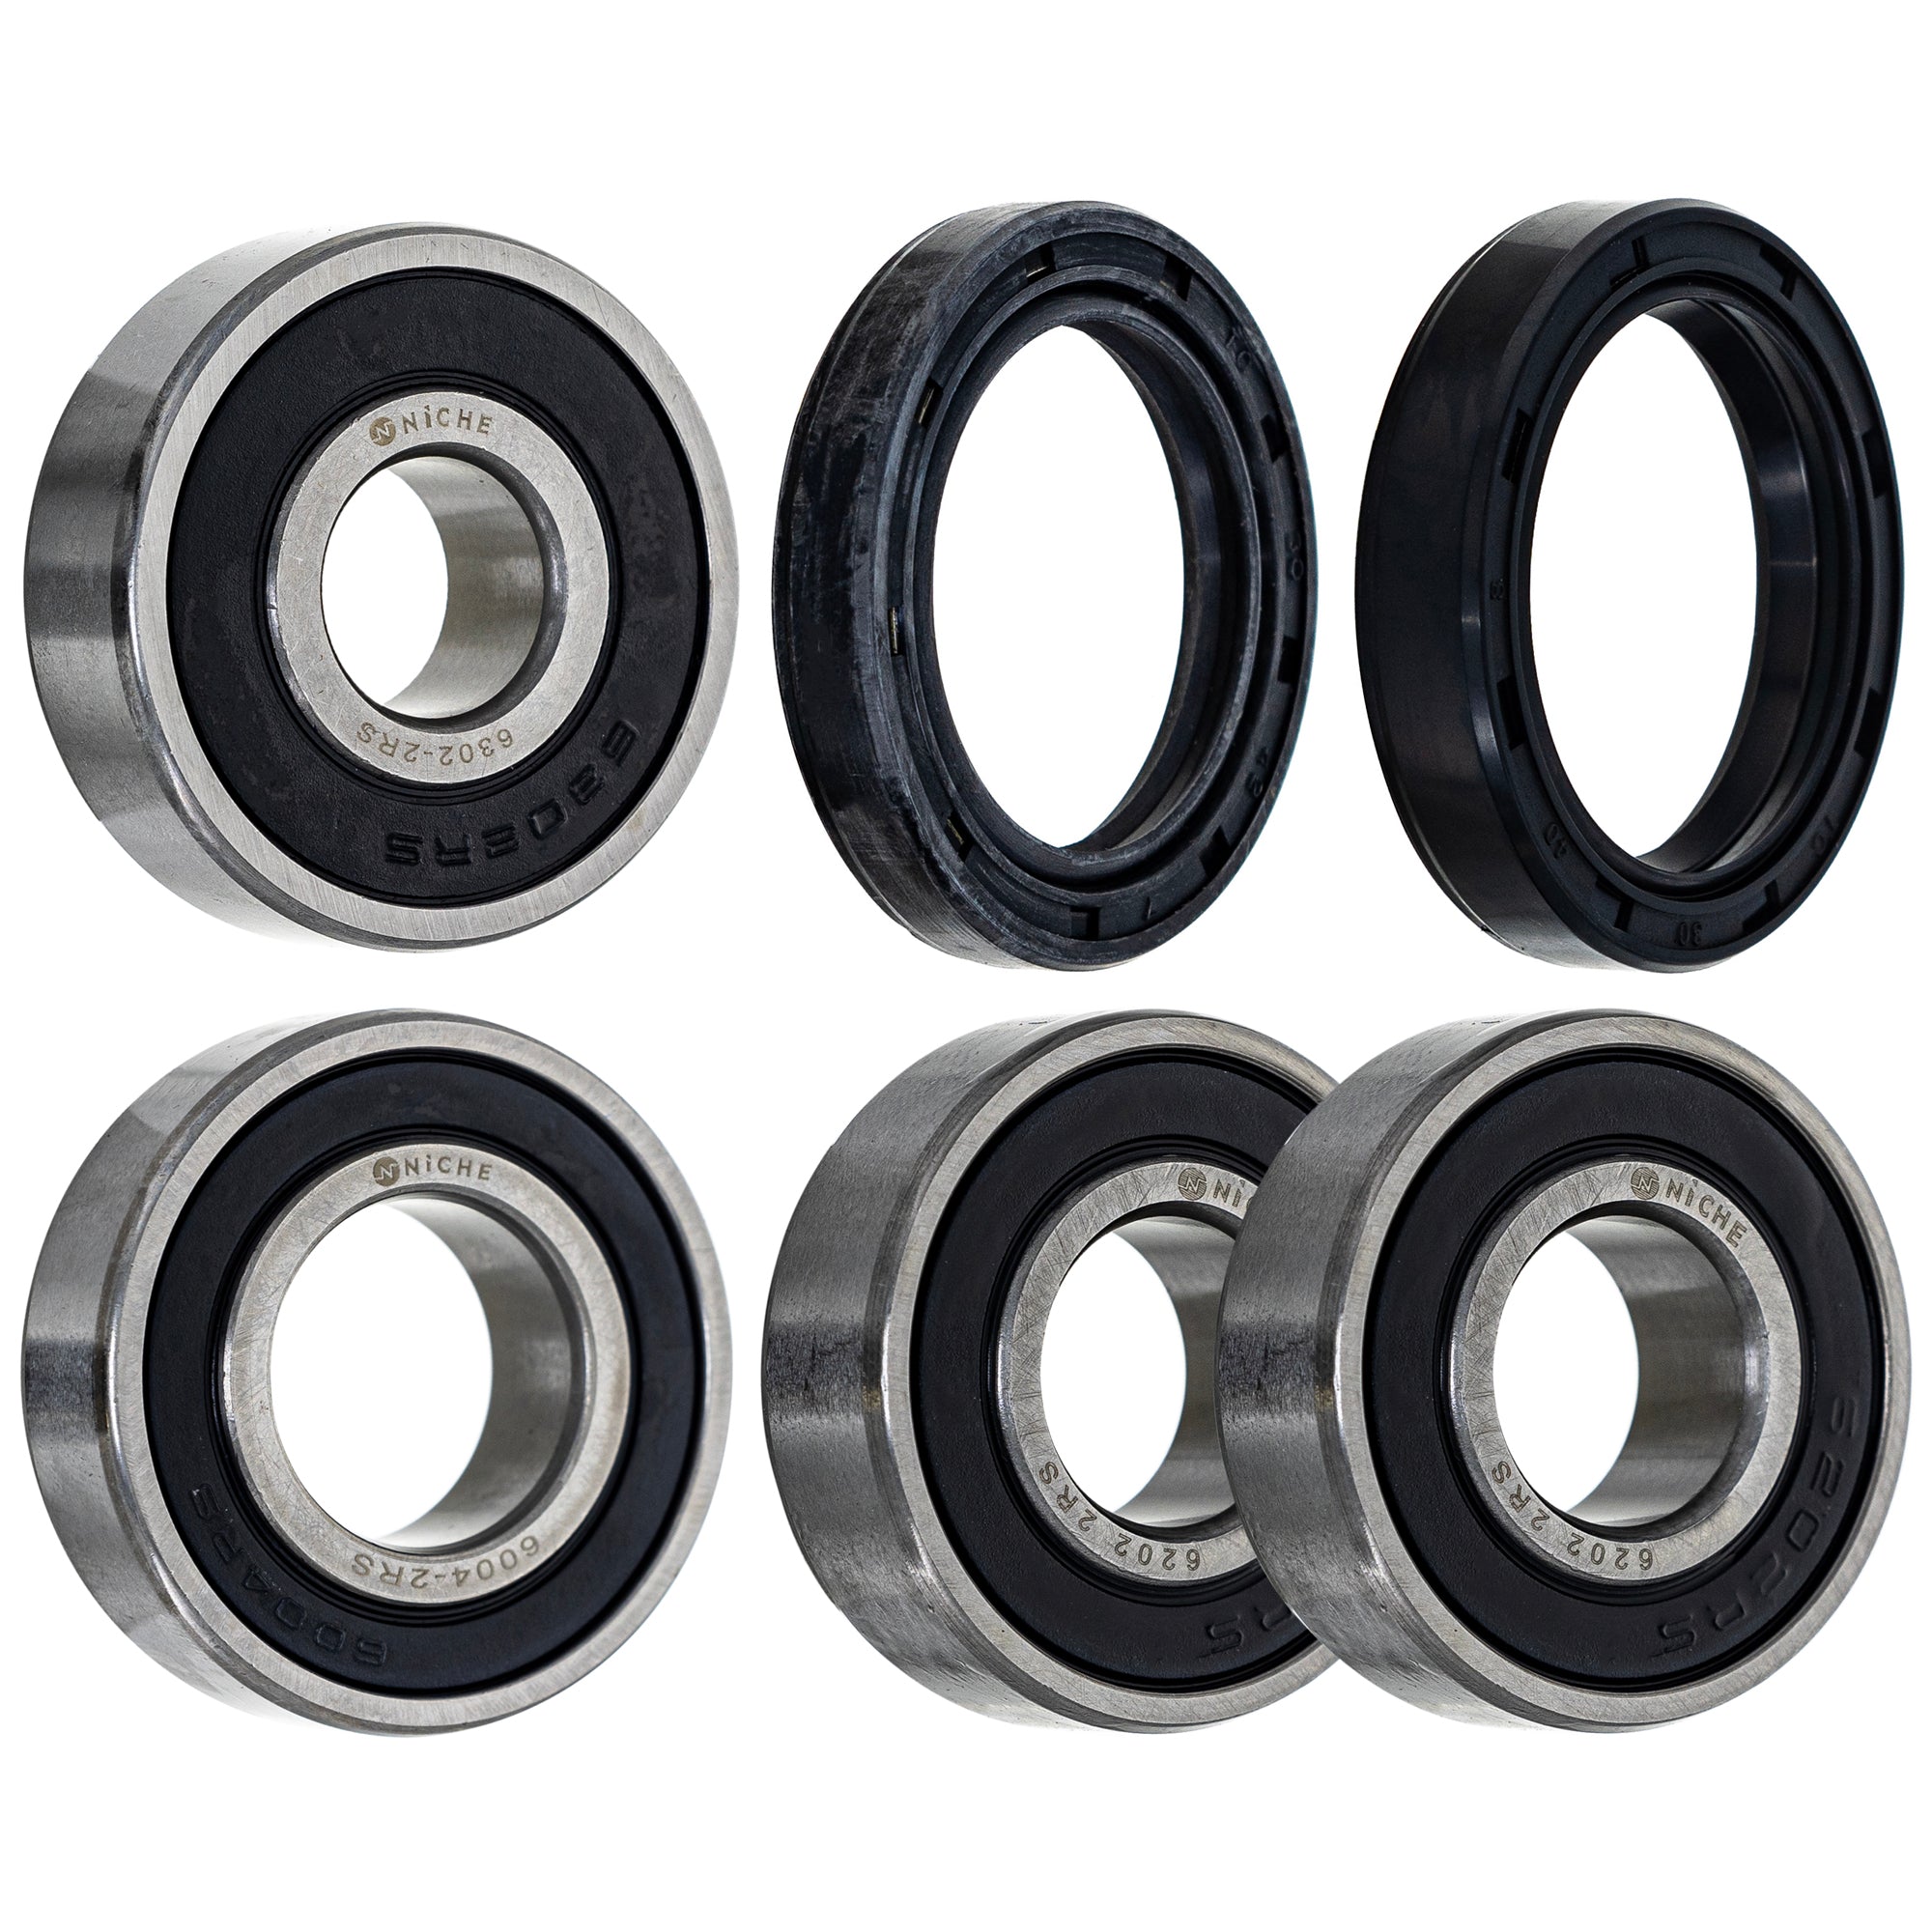 Wheel Bearing Seal Kit for zOTHER Ref No RD60 NICHE MK1008833